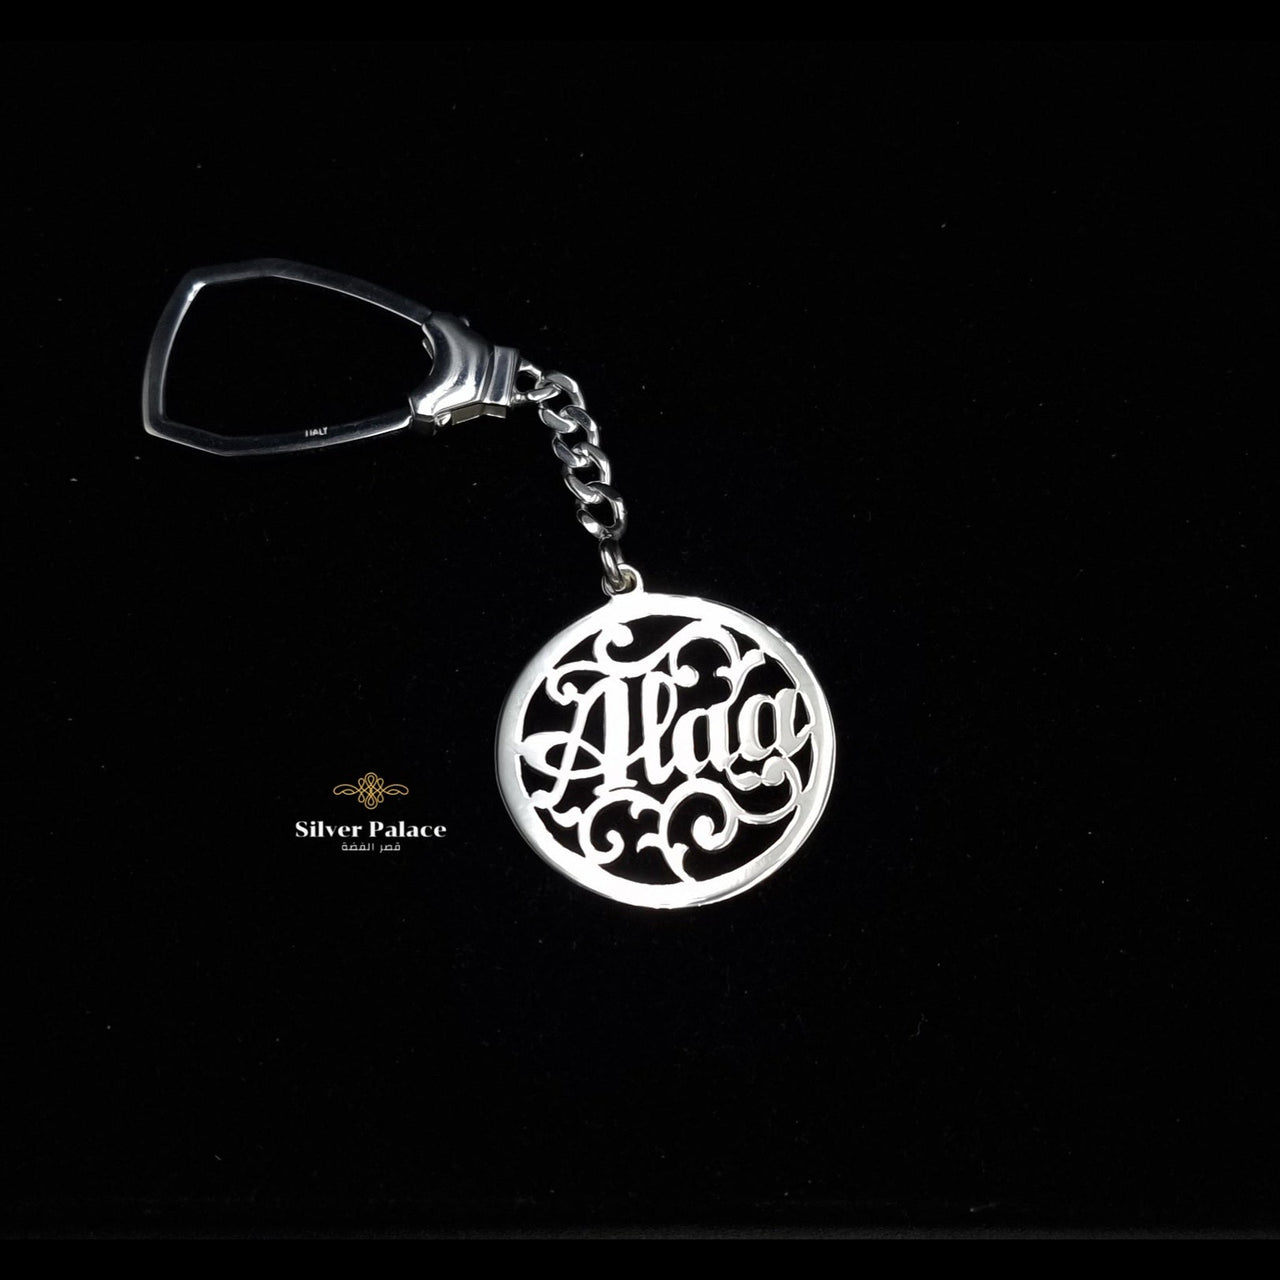 Hand-made keychain with personalized name